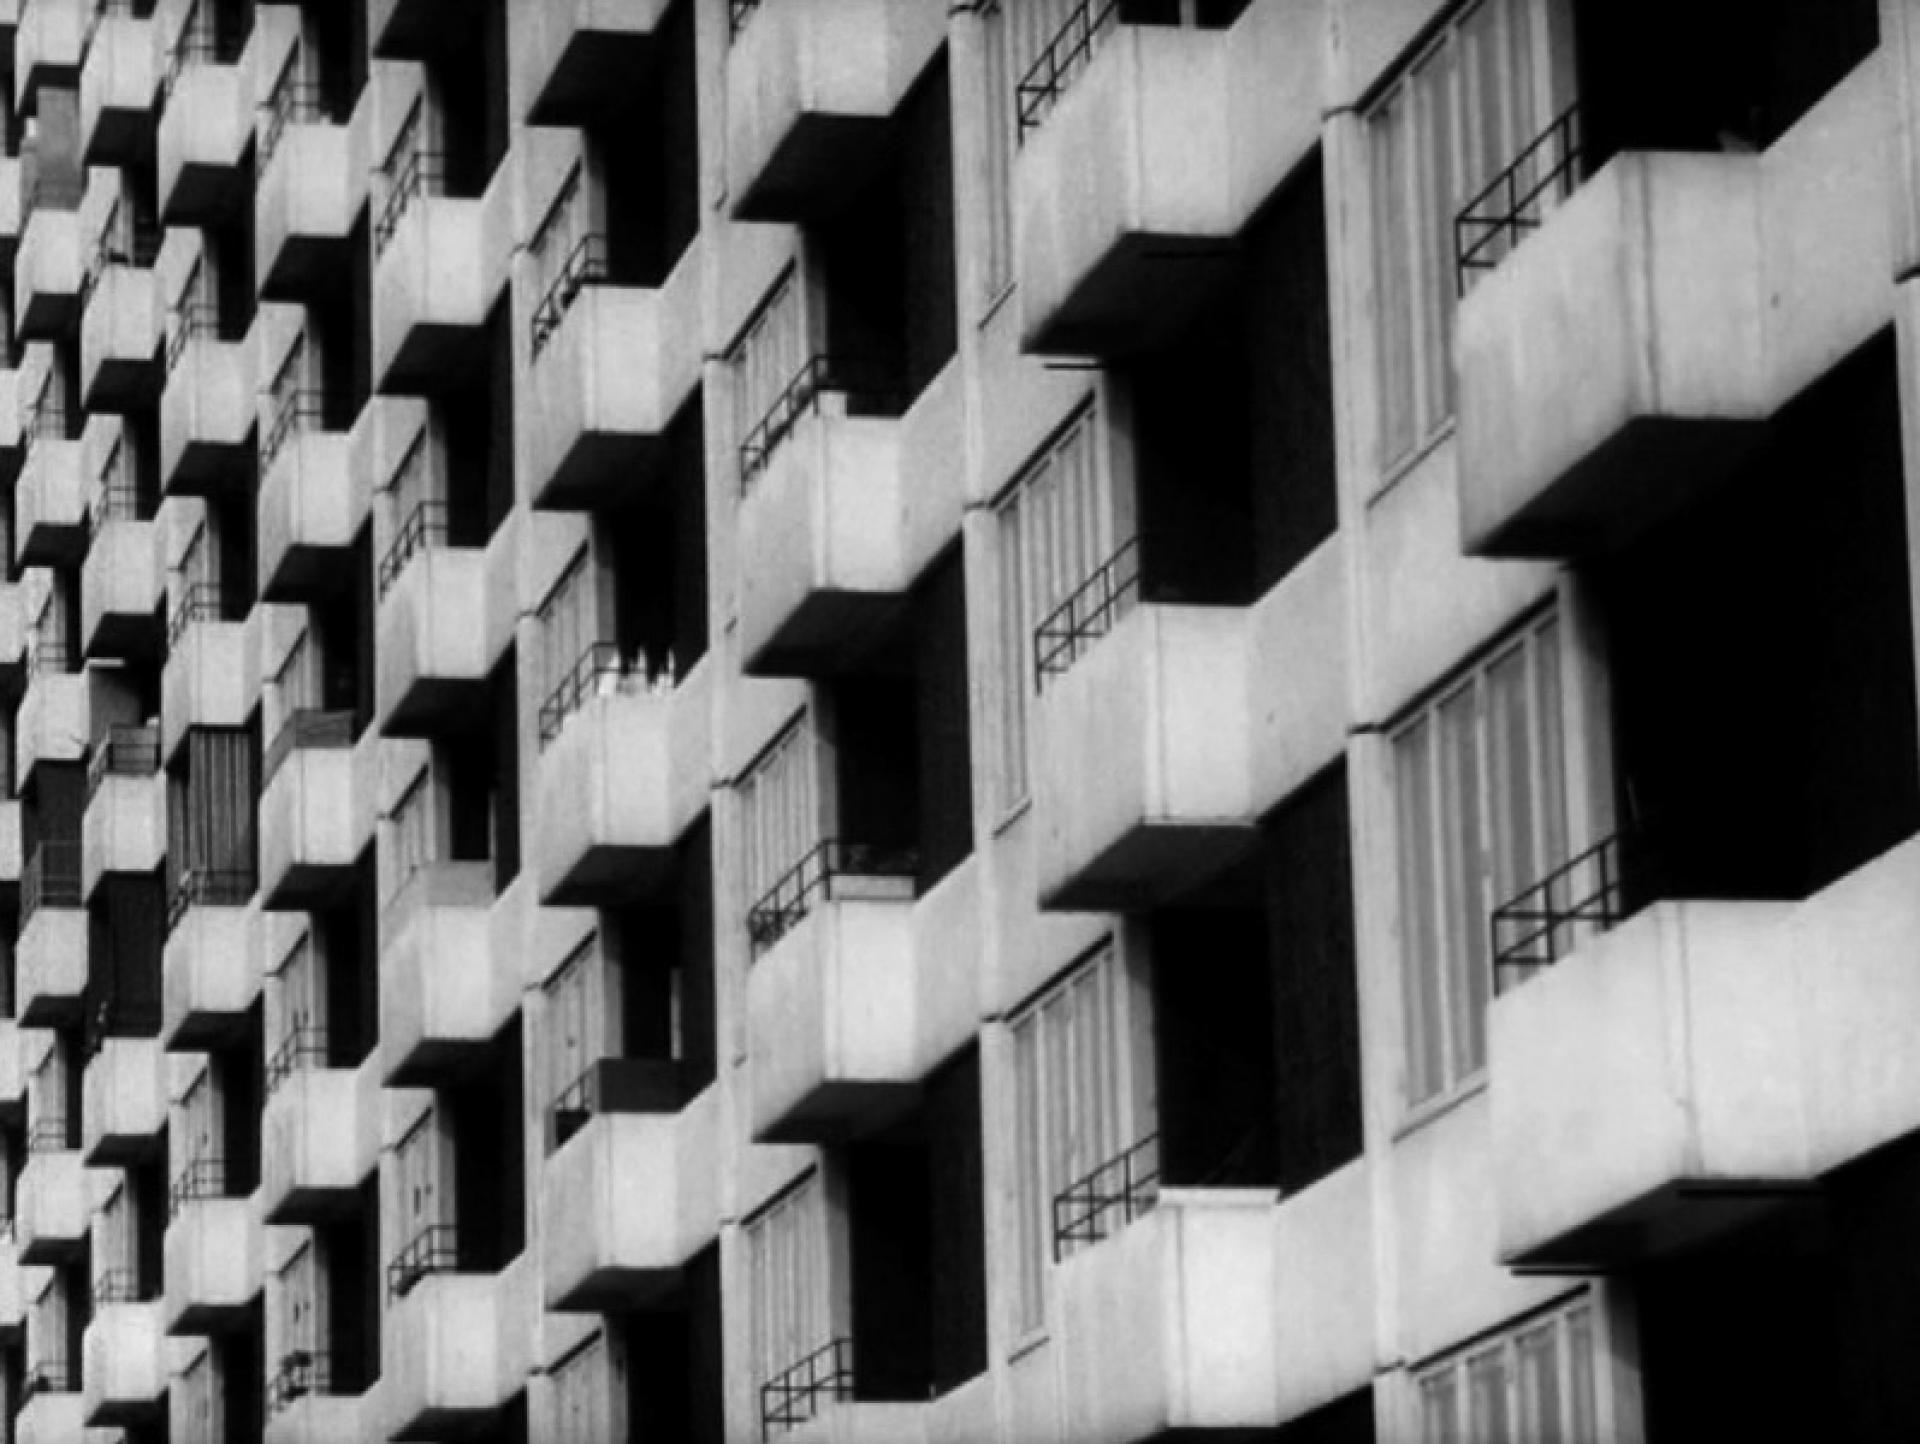 Still from ‘Behind the Same Facades’.